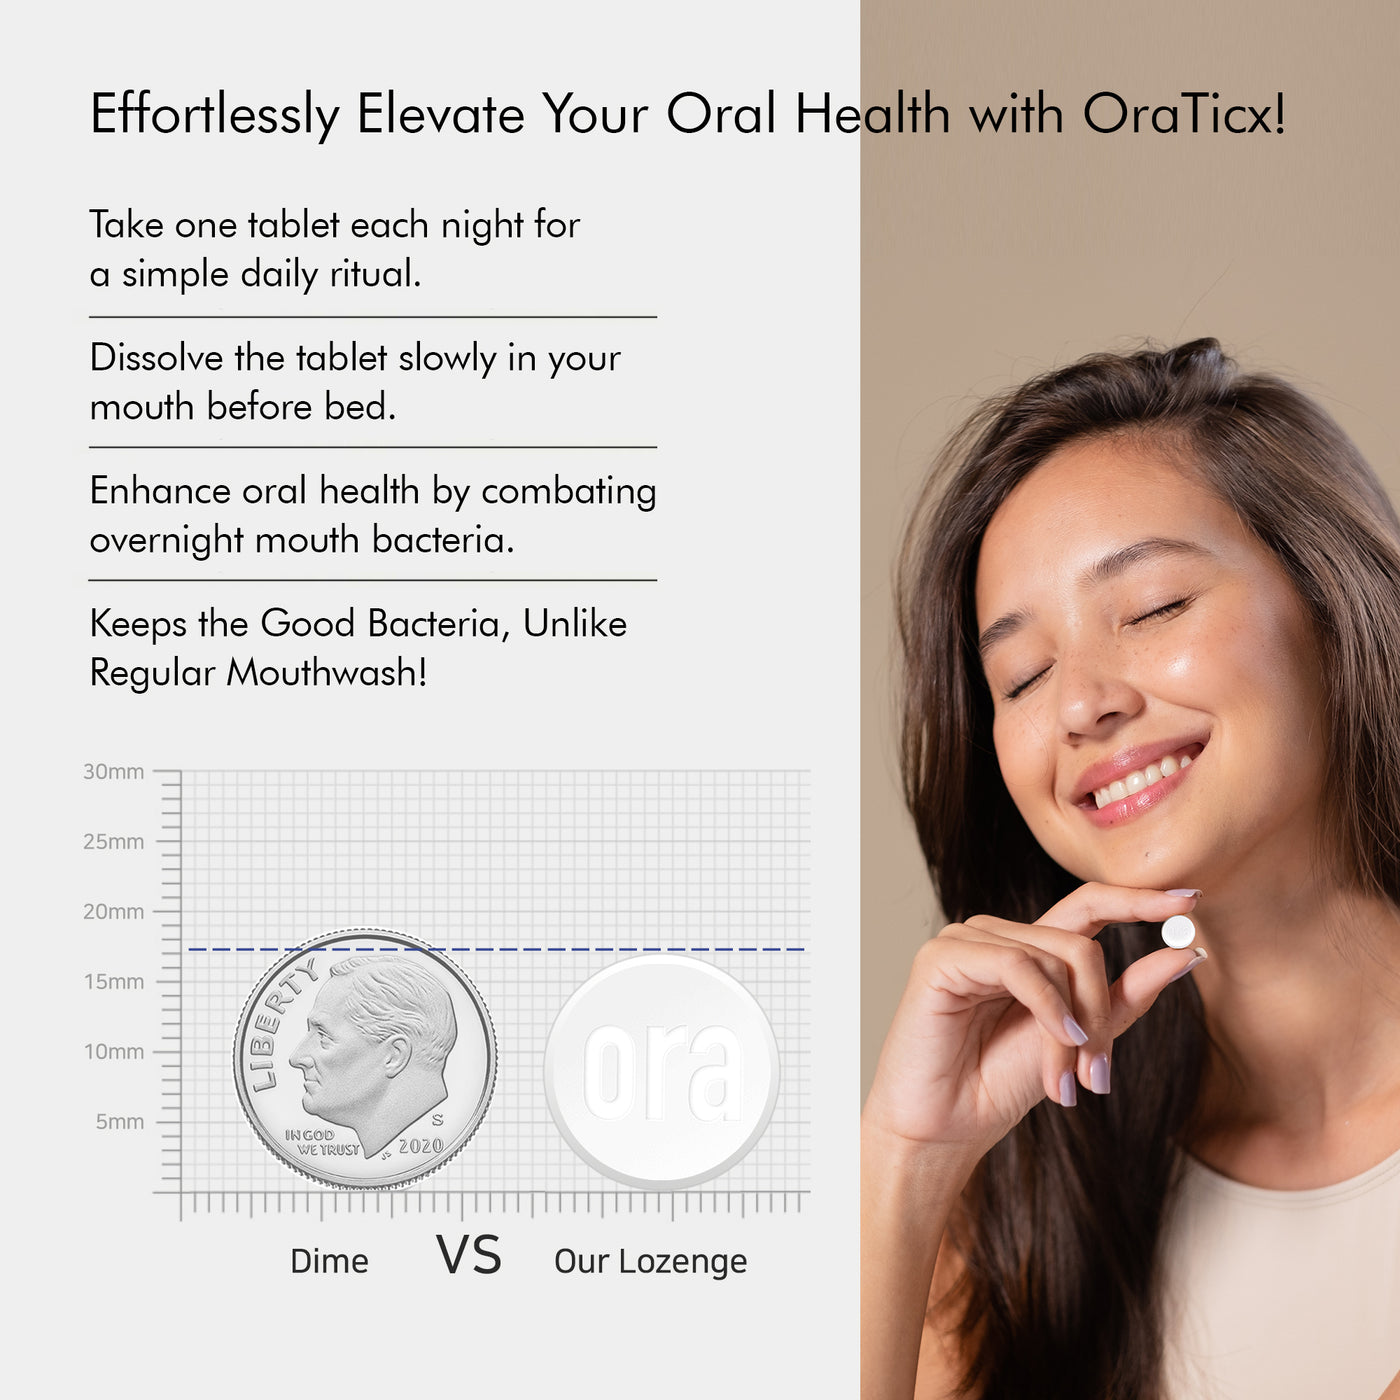 Effortlessly elevate your oral health with OraTicx